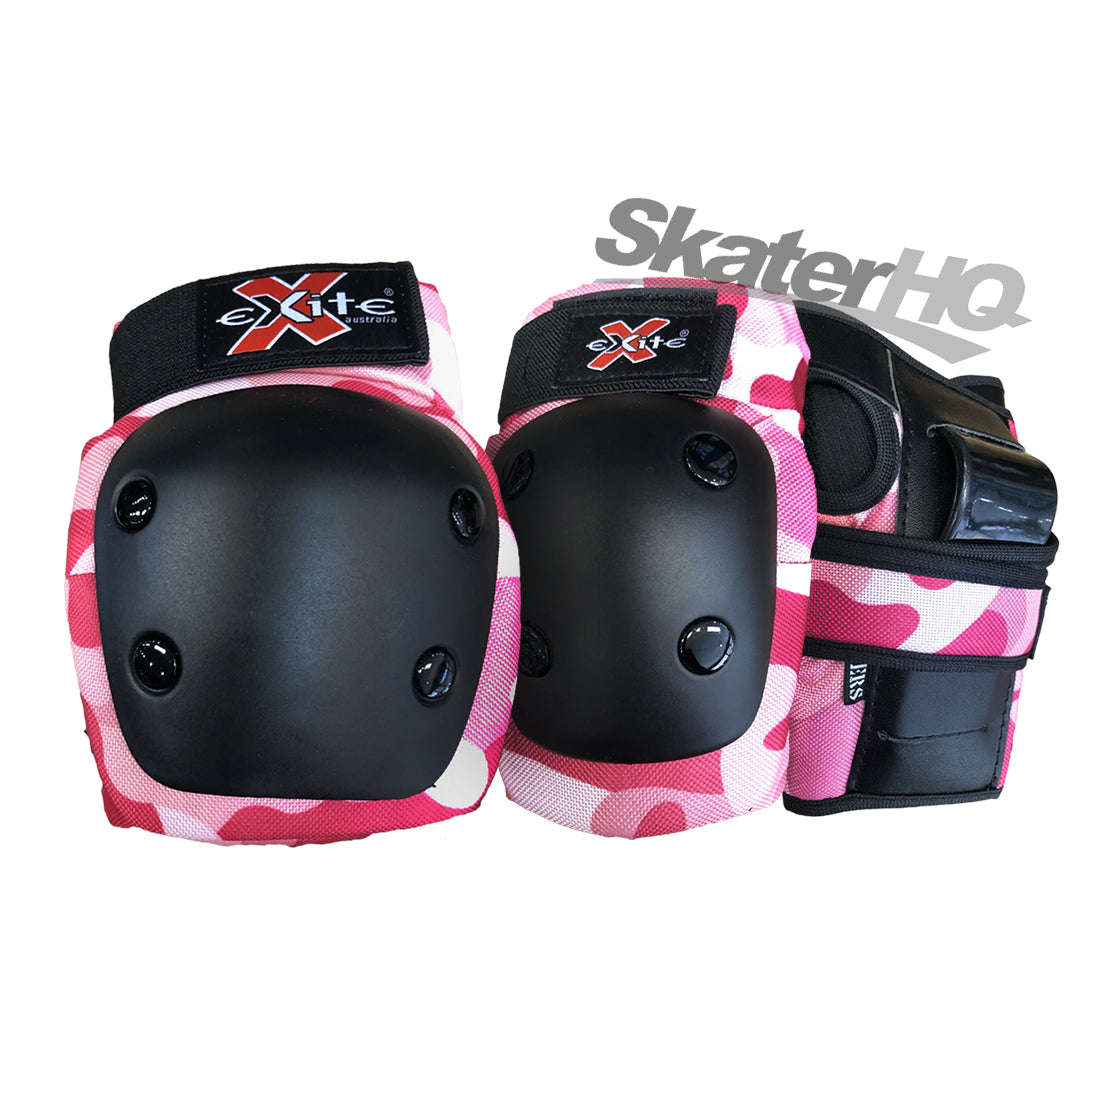 Exite Critters Tripack - Camo Pink - Youth Small Protective Gear